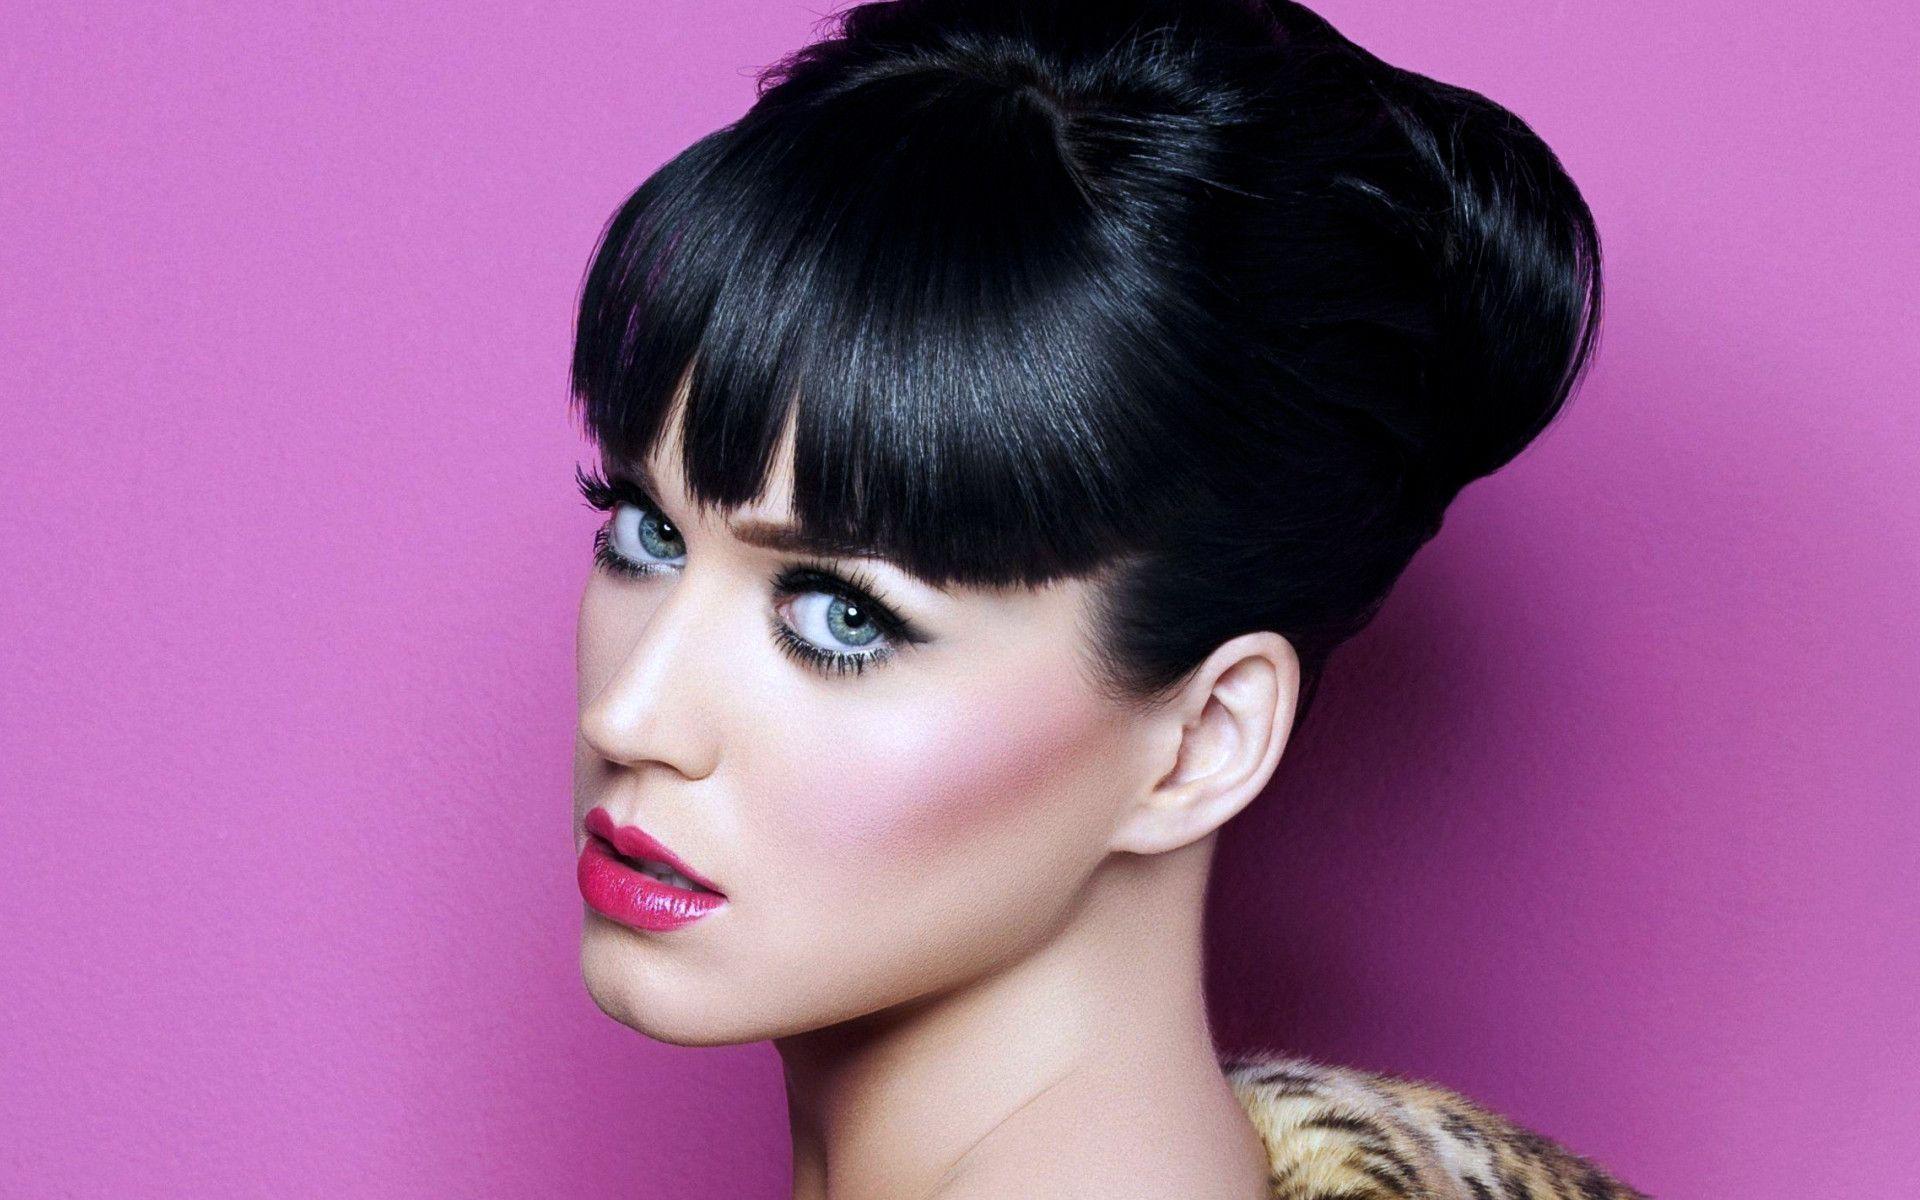 Beautiful Katy Perry Hairstyle and Makeup Wallpaper